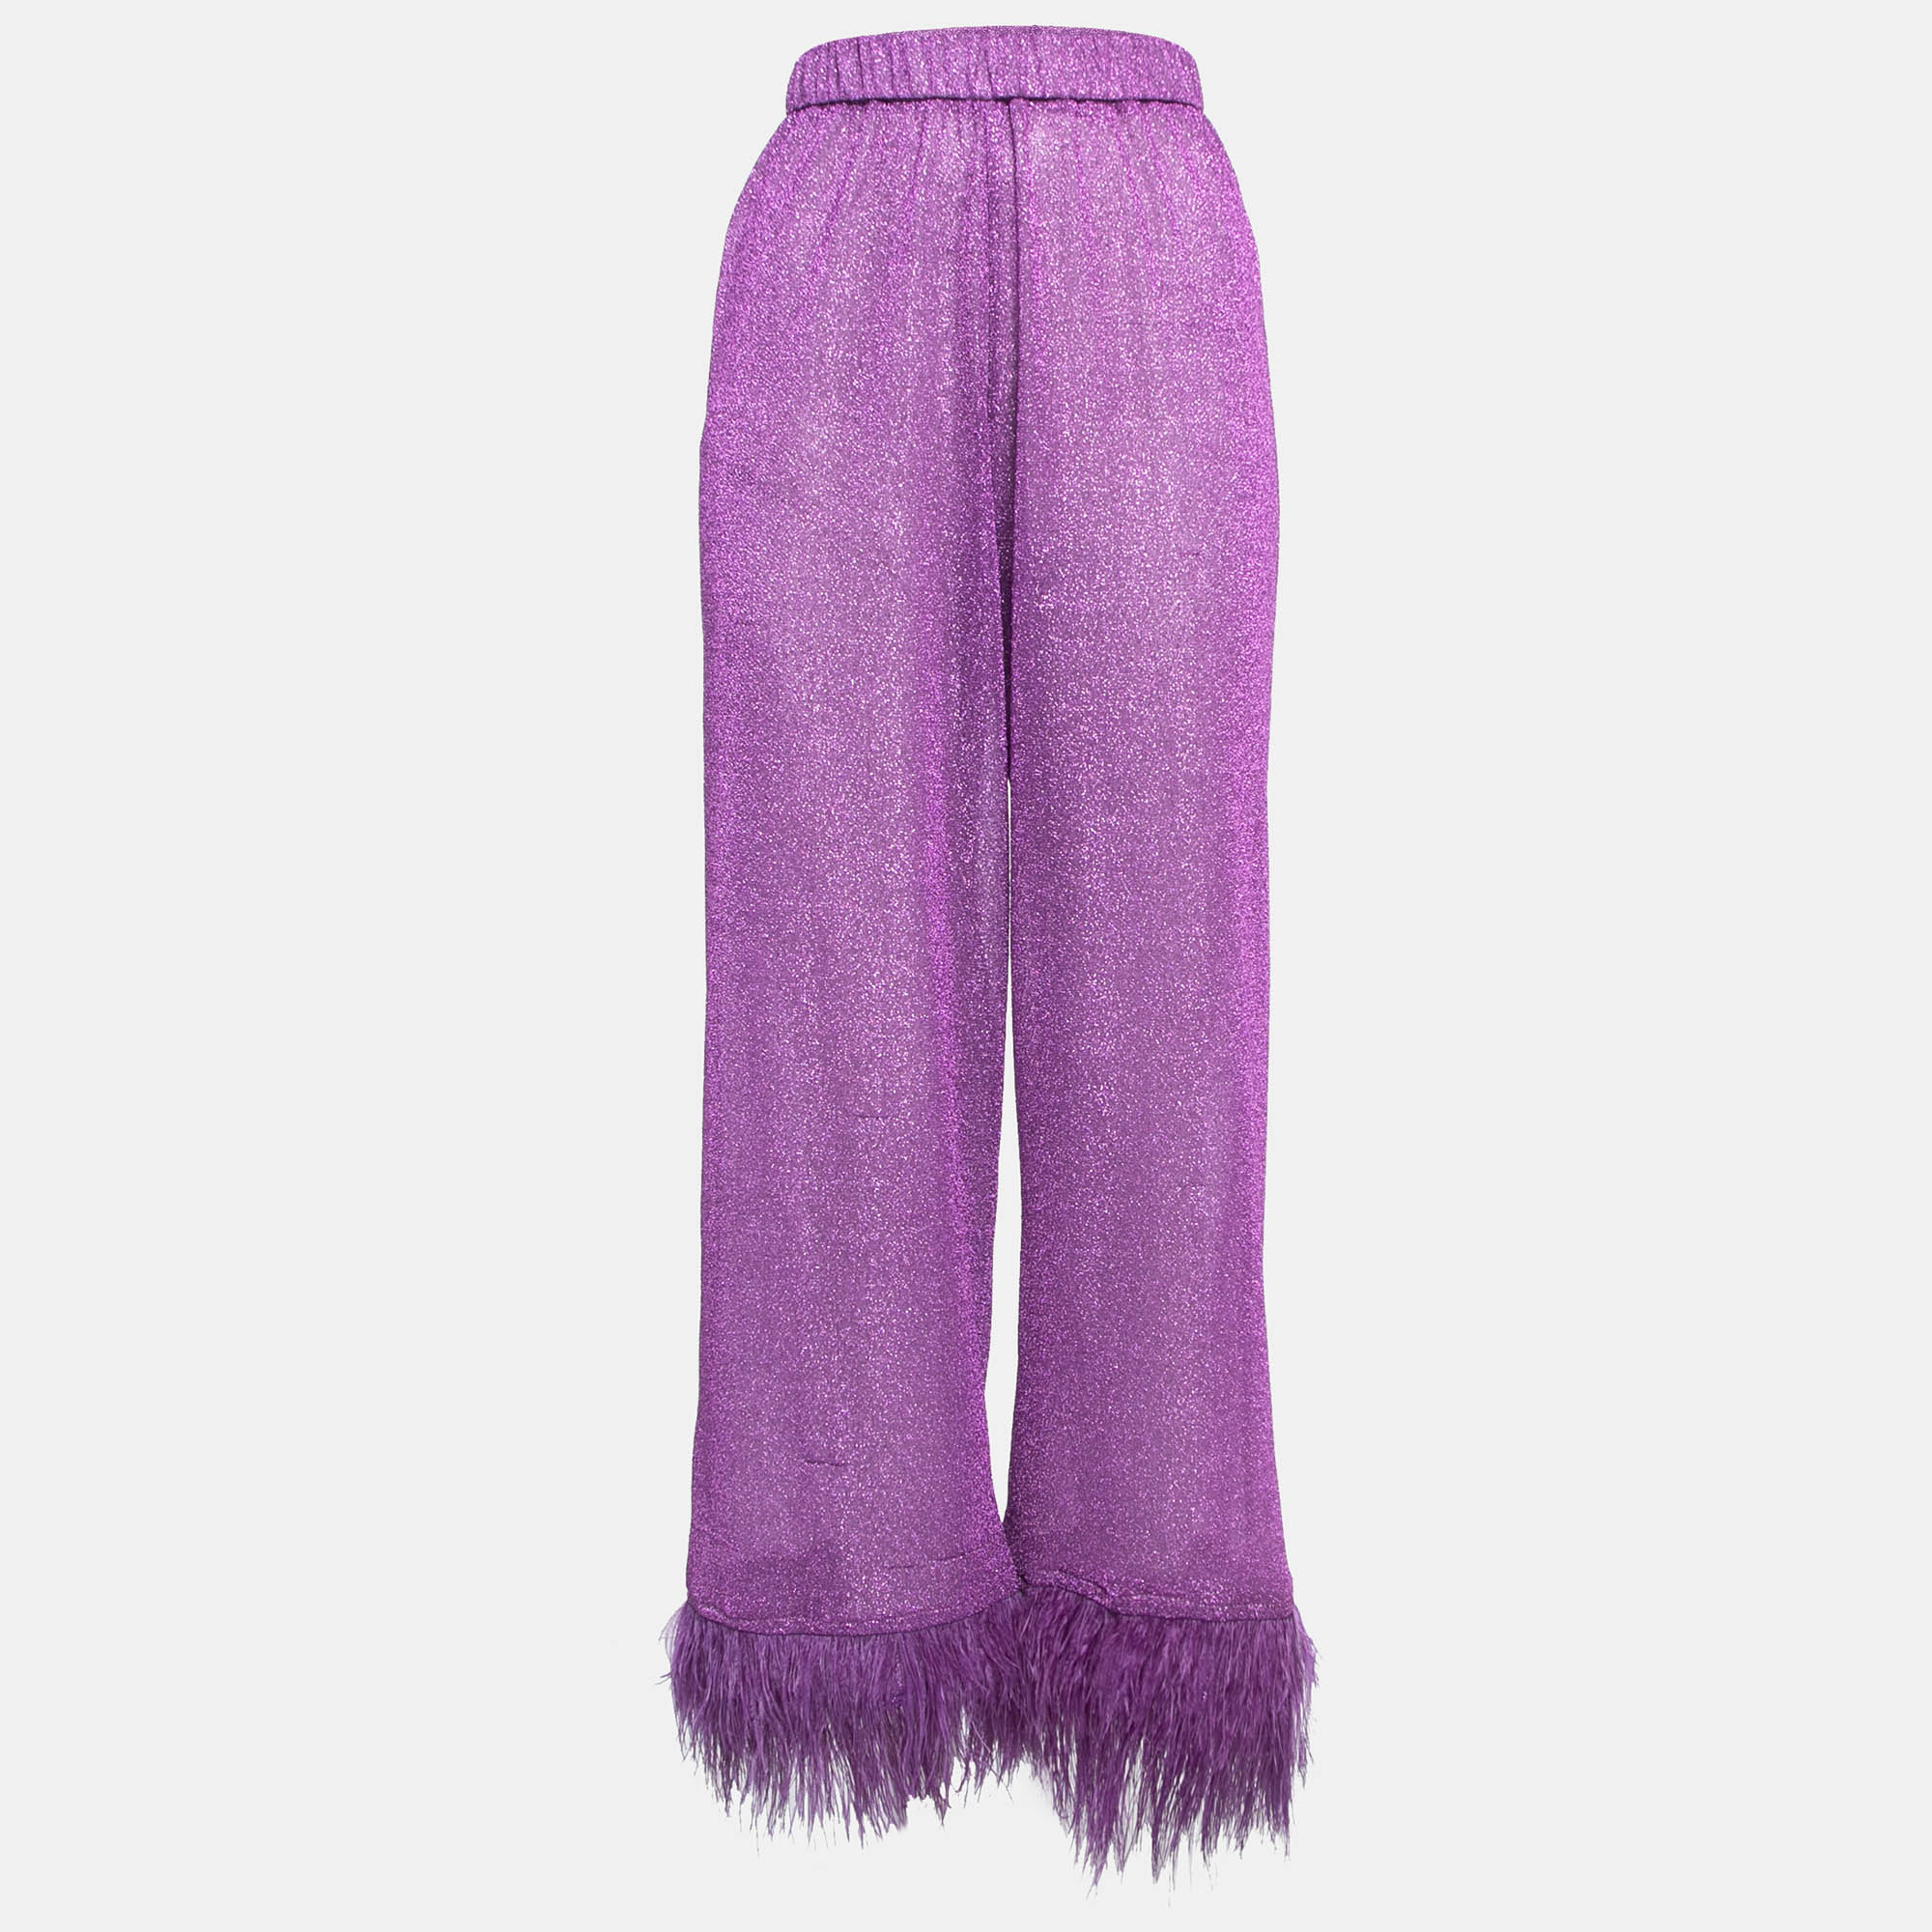 Pre-owned Oseree Purple Lurex Knit Feather Trim Sheer Trousers S